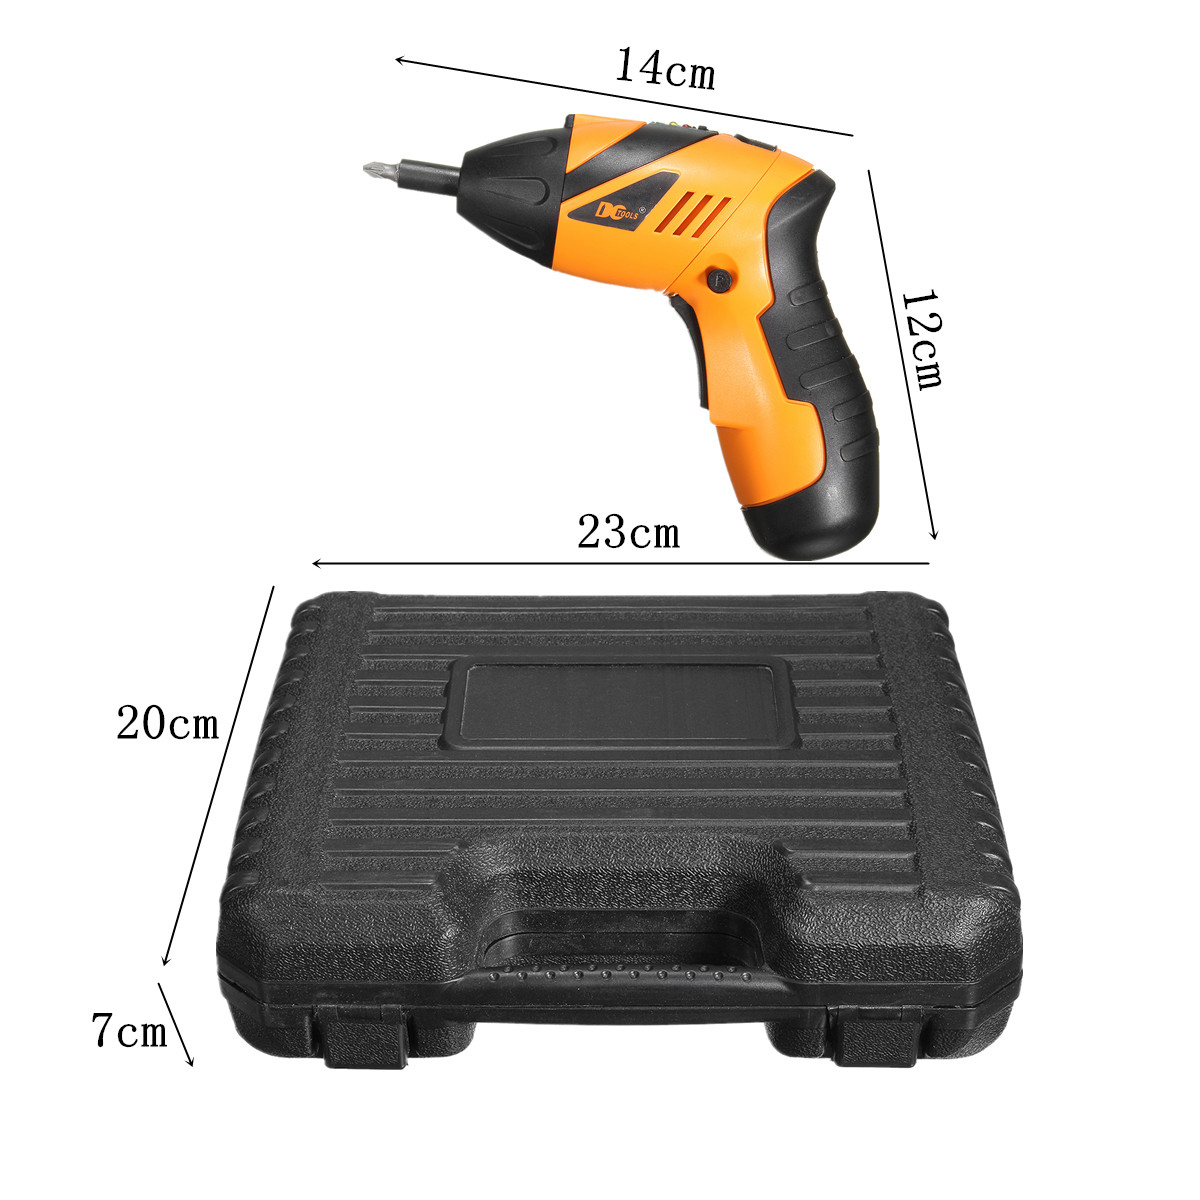 DCTOOLS-45-In-1-Non-slip-Electric-Drill-Cordless-Screwdriver-Foldable-with-US-Charger-1145930-10